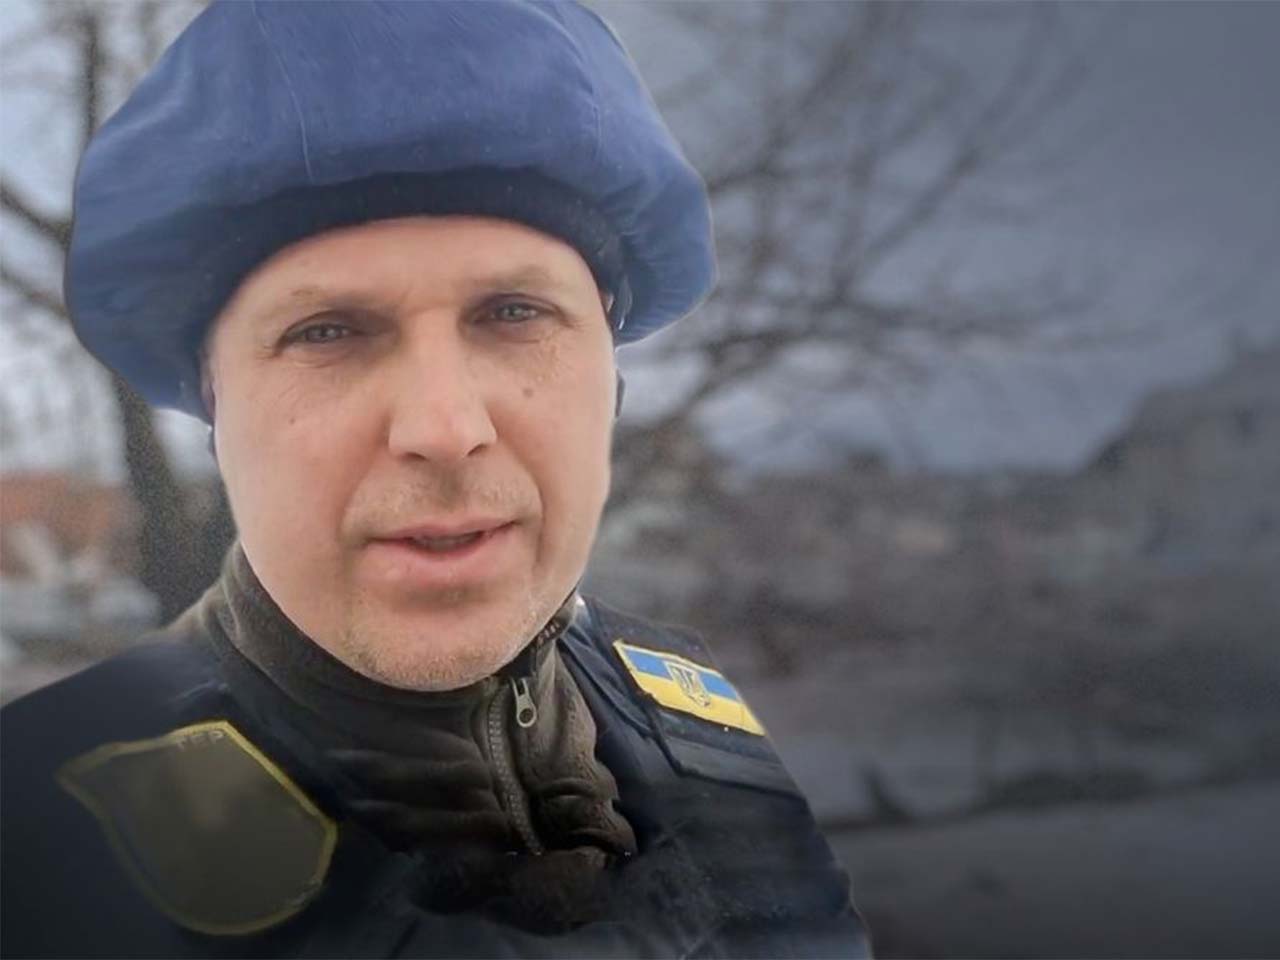 Body Armor-Wearing Pastors Risk All to Deliver Aid to Ukraine Frontline